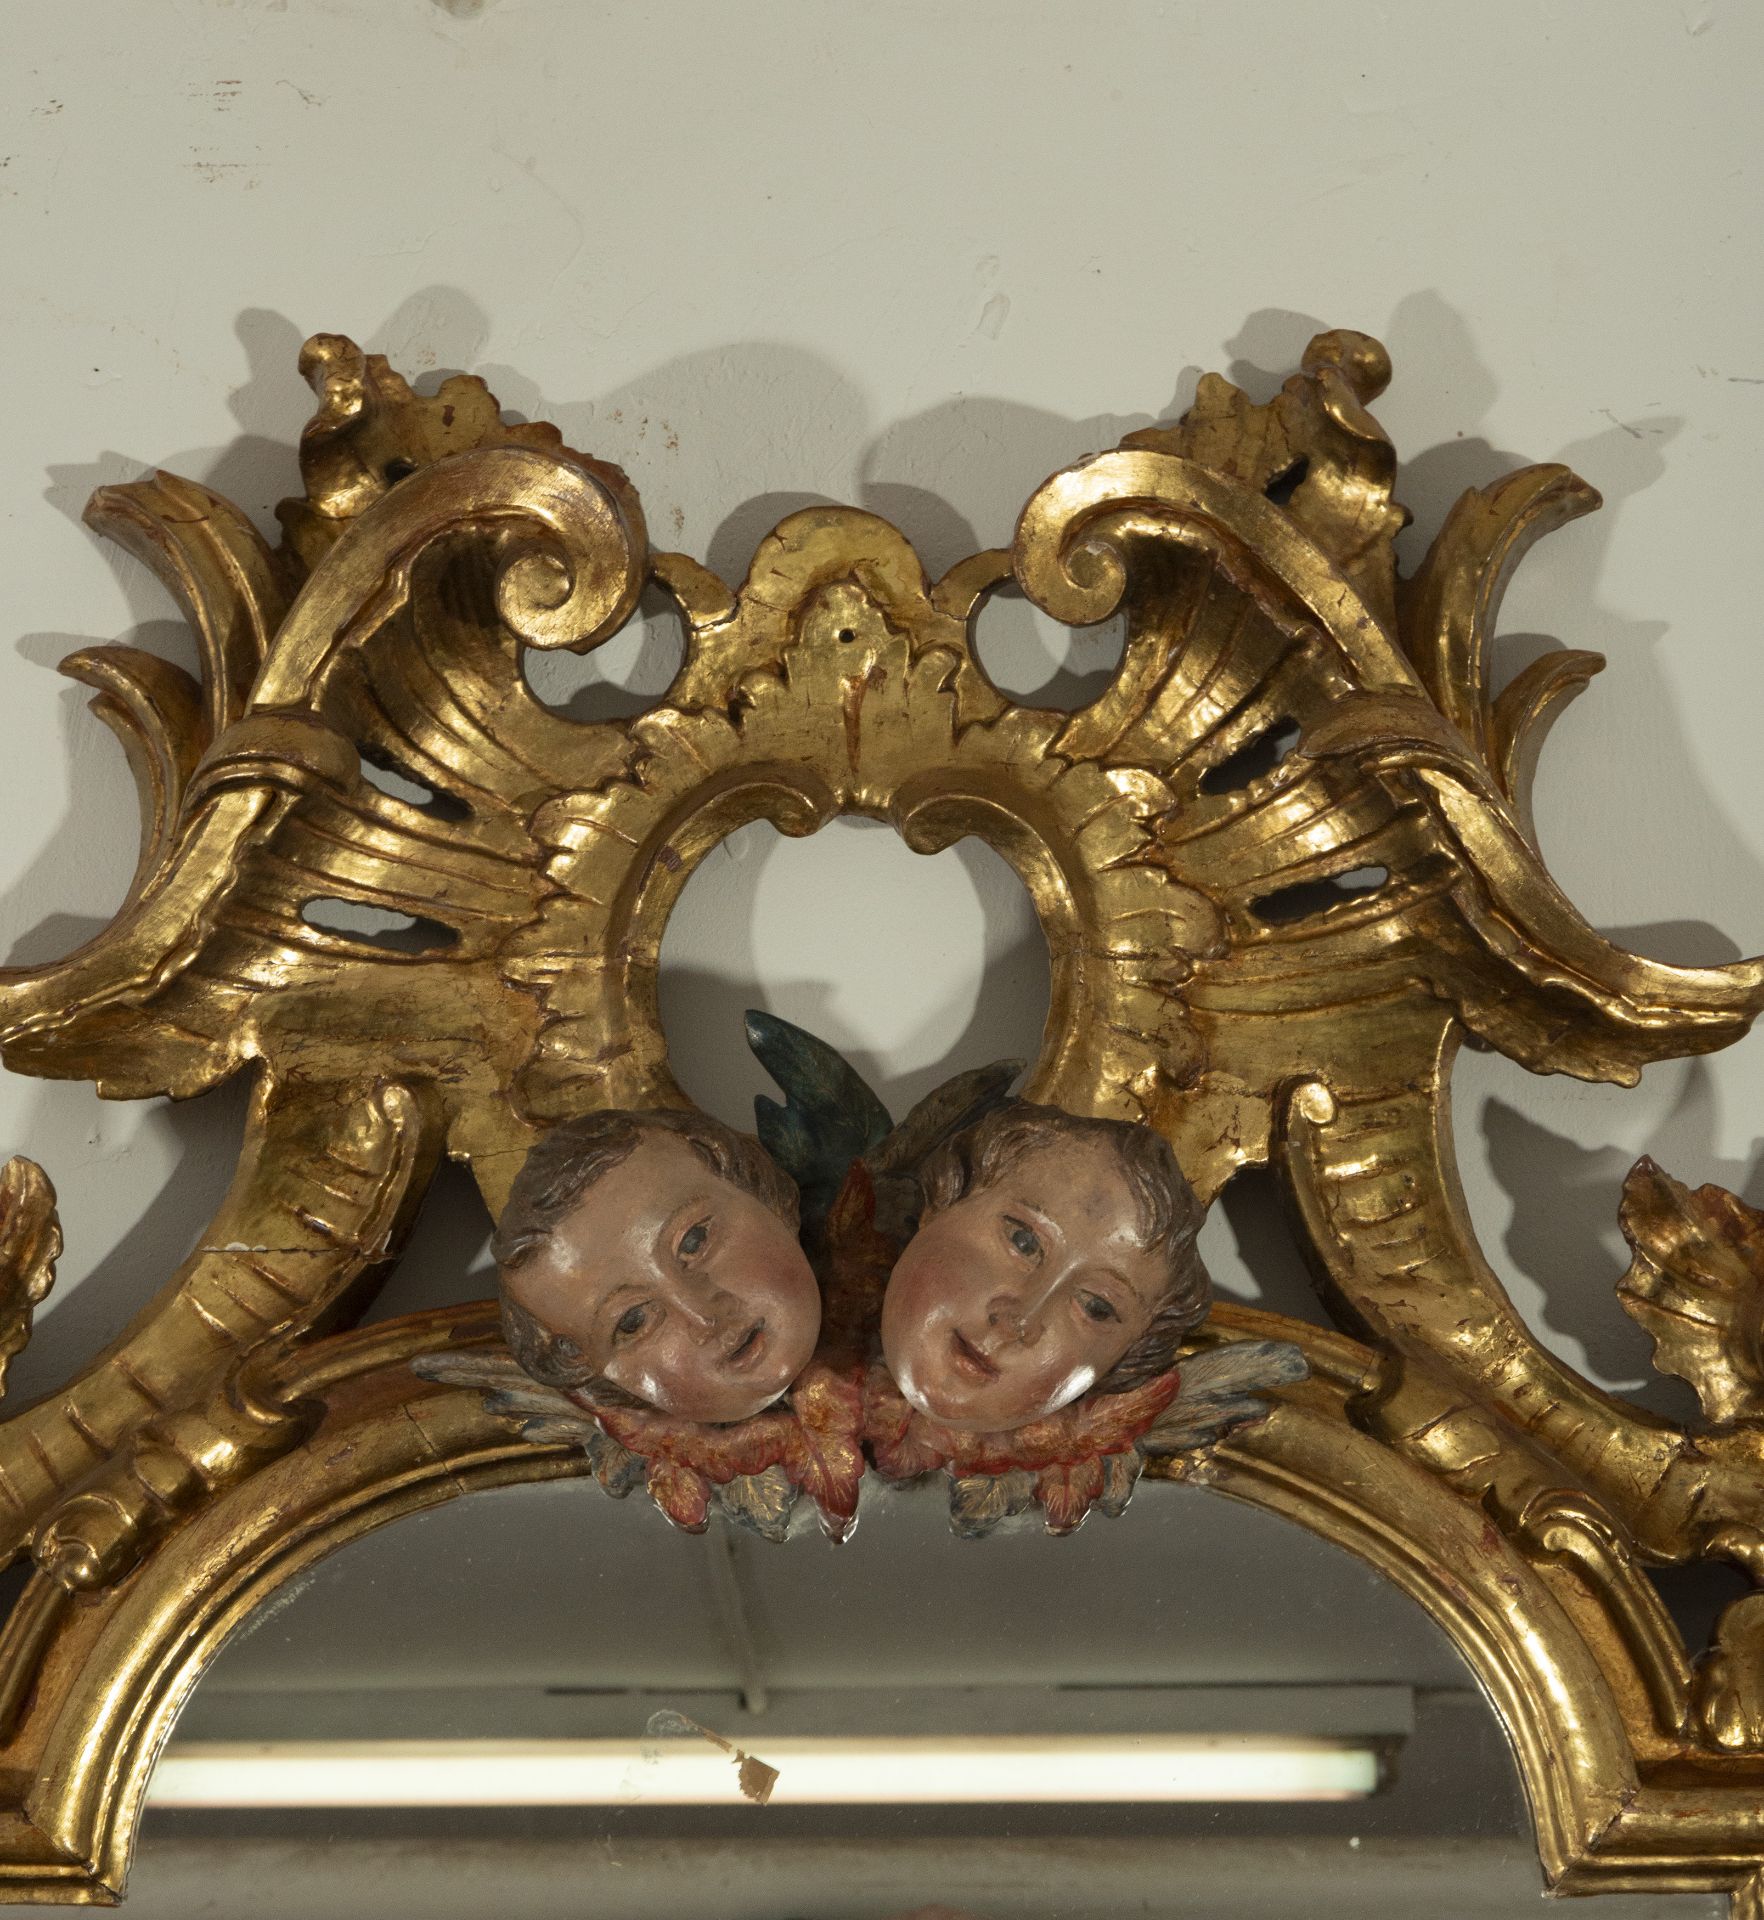 Antique Spanish frame from the 17th century transformed into a carved wood mirror - Image 4 of 6